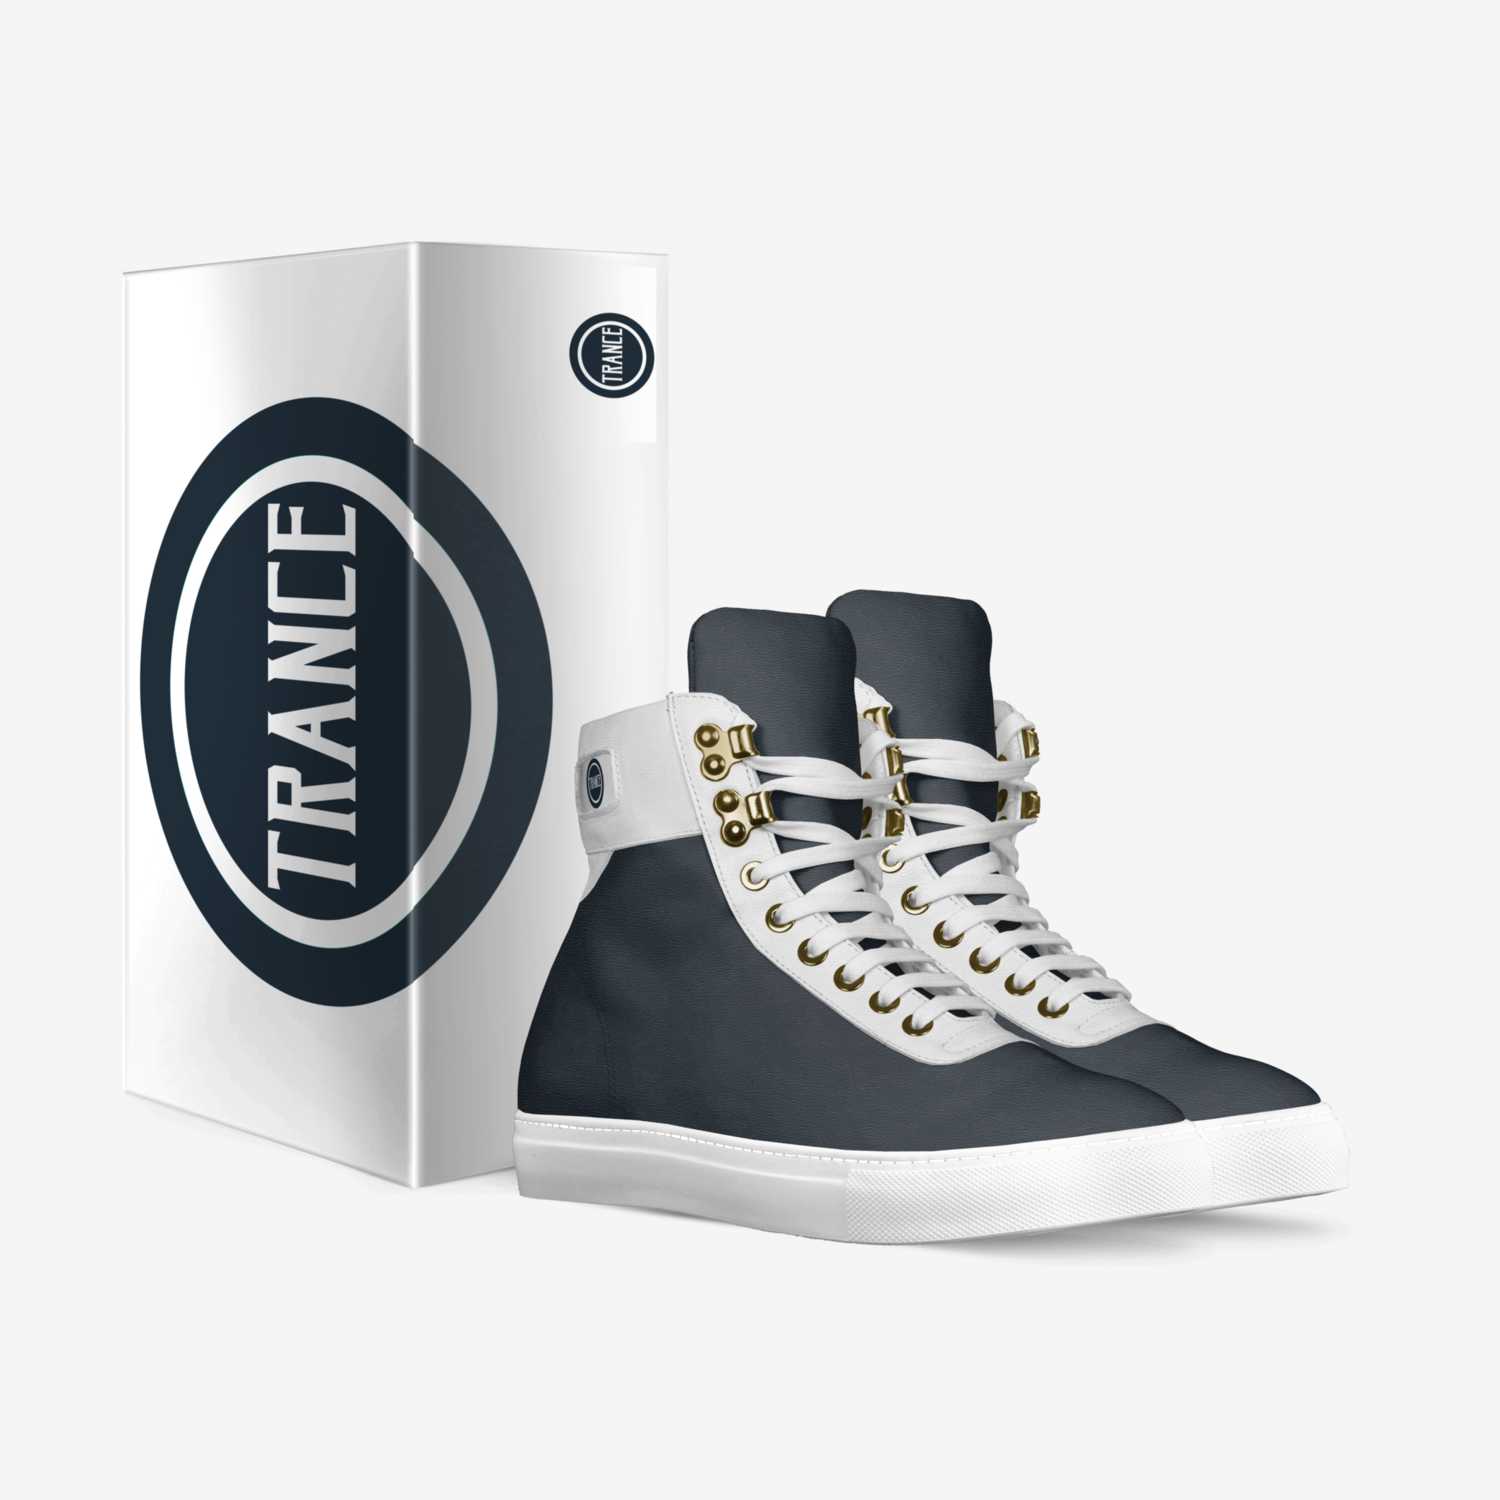 Trance custom made in Italy shoes by James Robinson | Box view